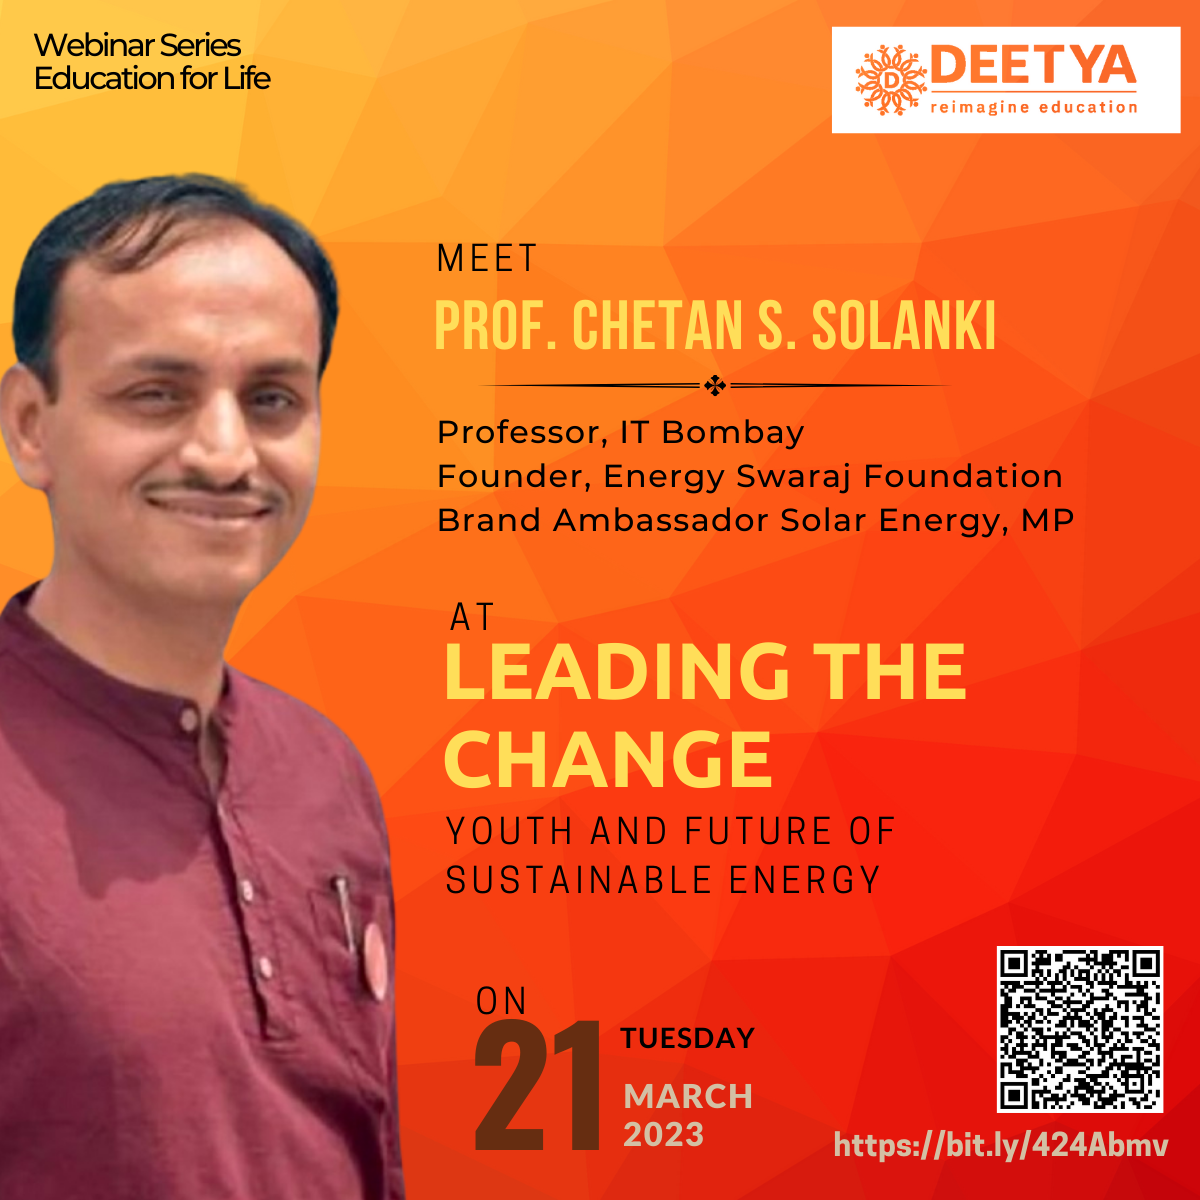 Leading the Change: Youth and Future of Sustainable Energy, Online Event